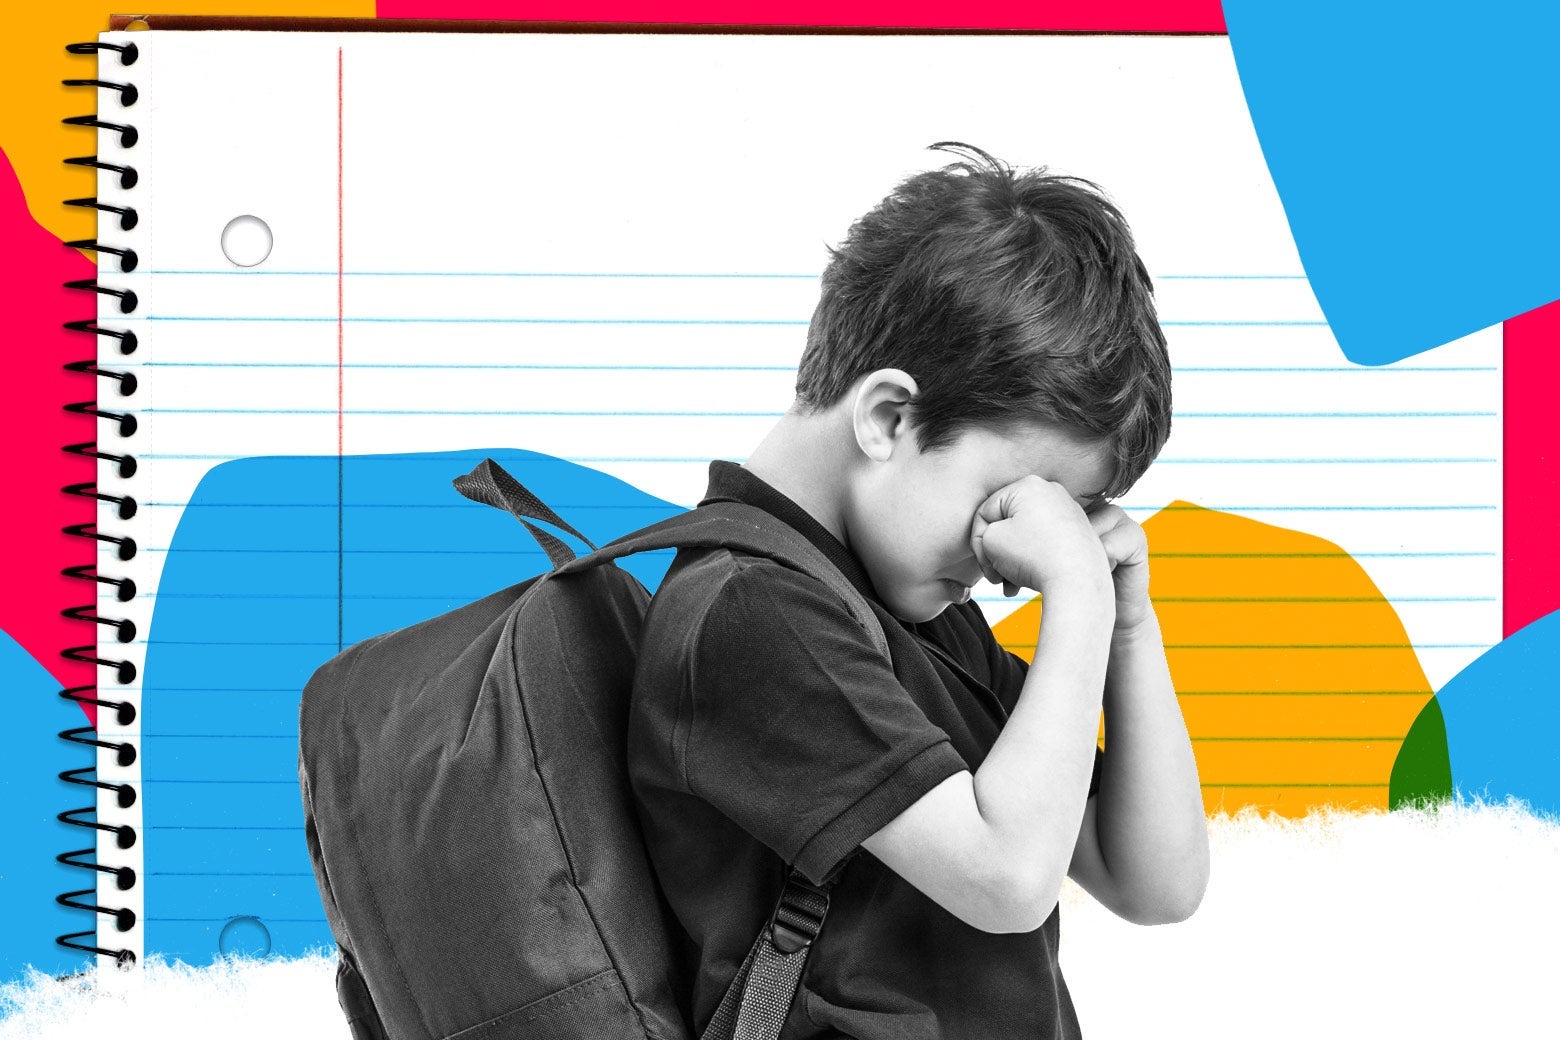 Photo illustration of a young boy crying into his hands while wearing a backpack.